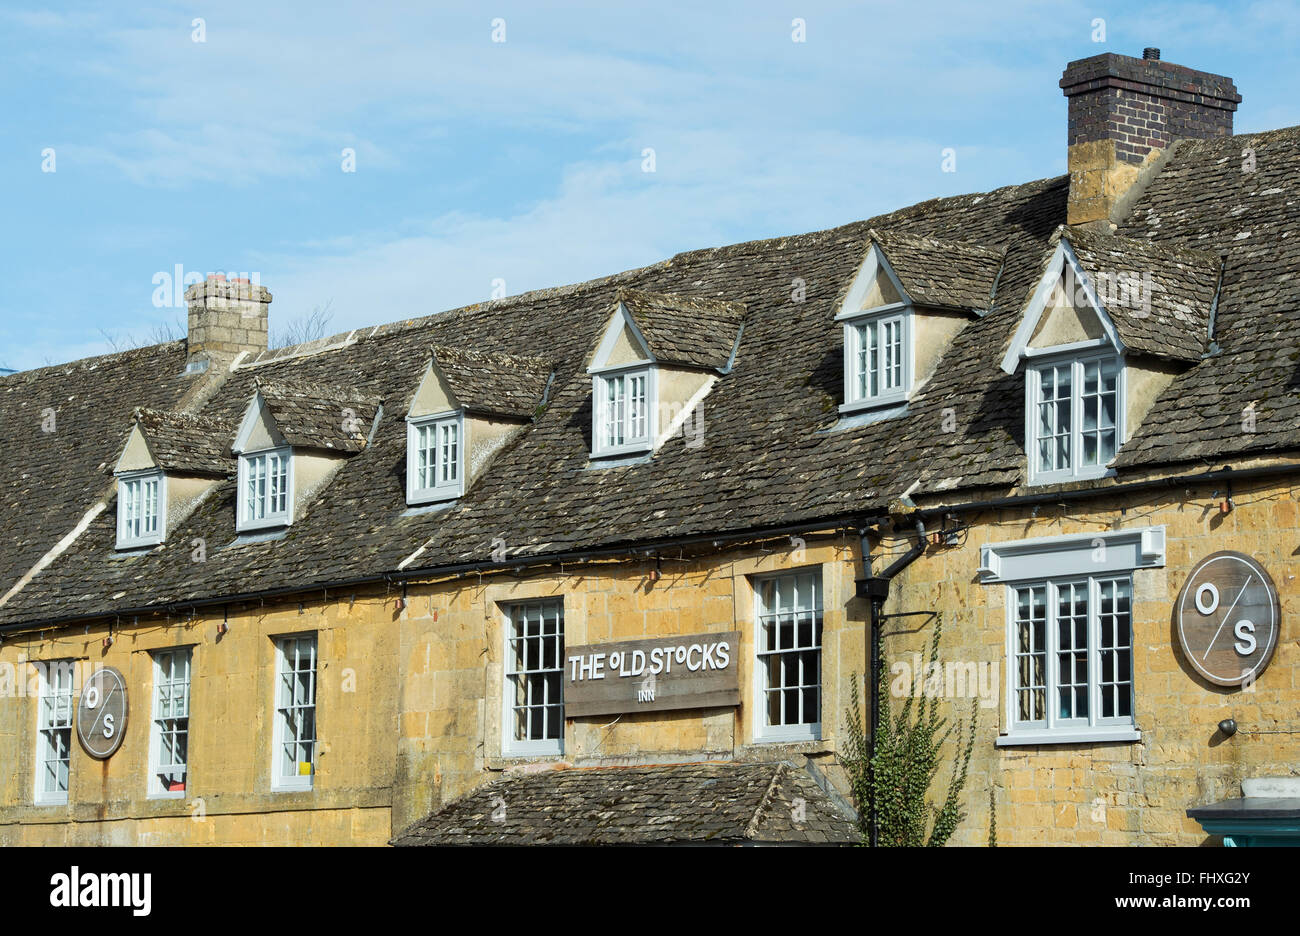 The Old Stocks Inn, Stow on the Wold, Gloucestershire, Cotswolds, England Stock Photo